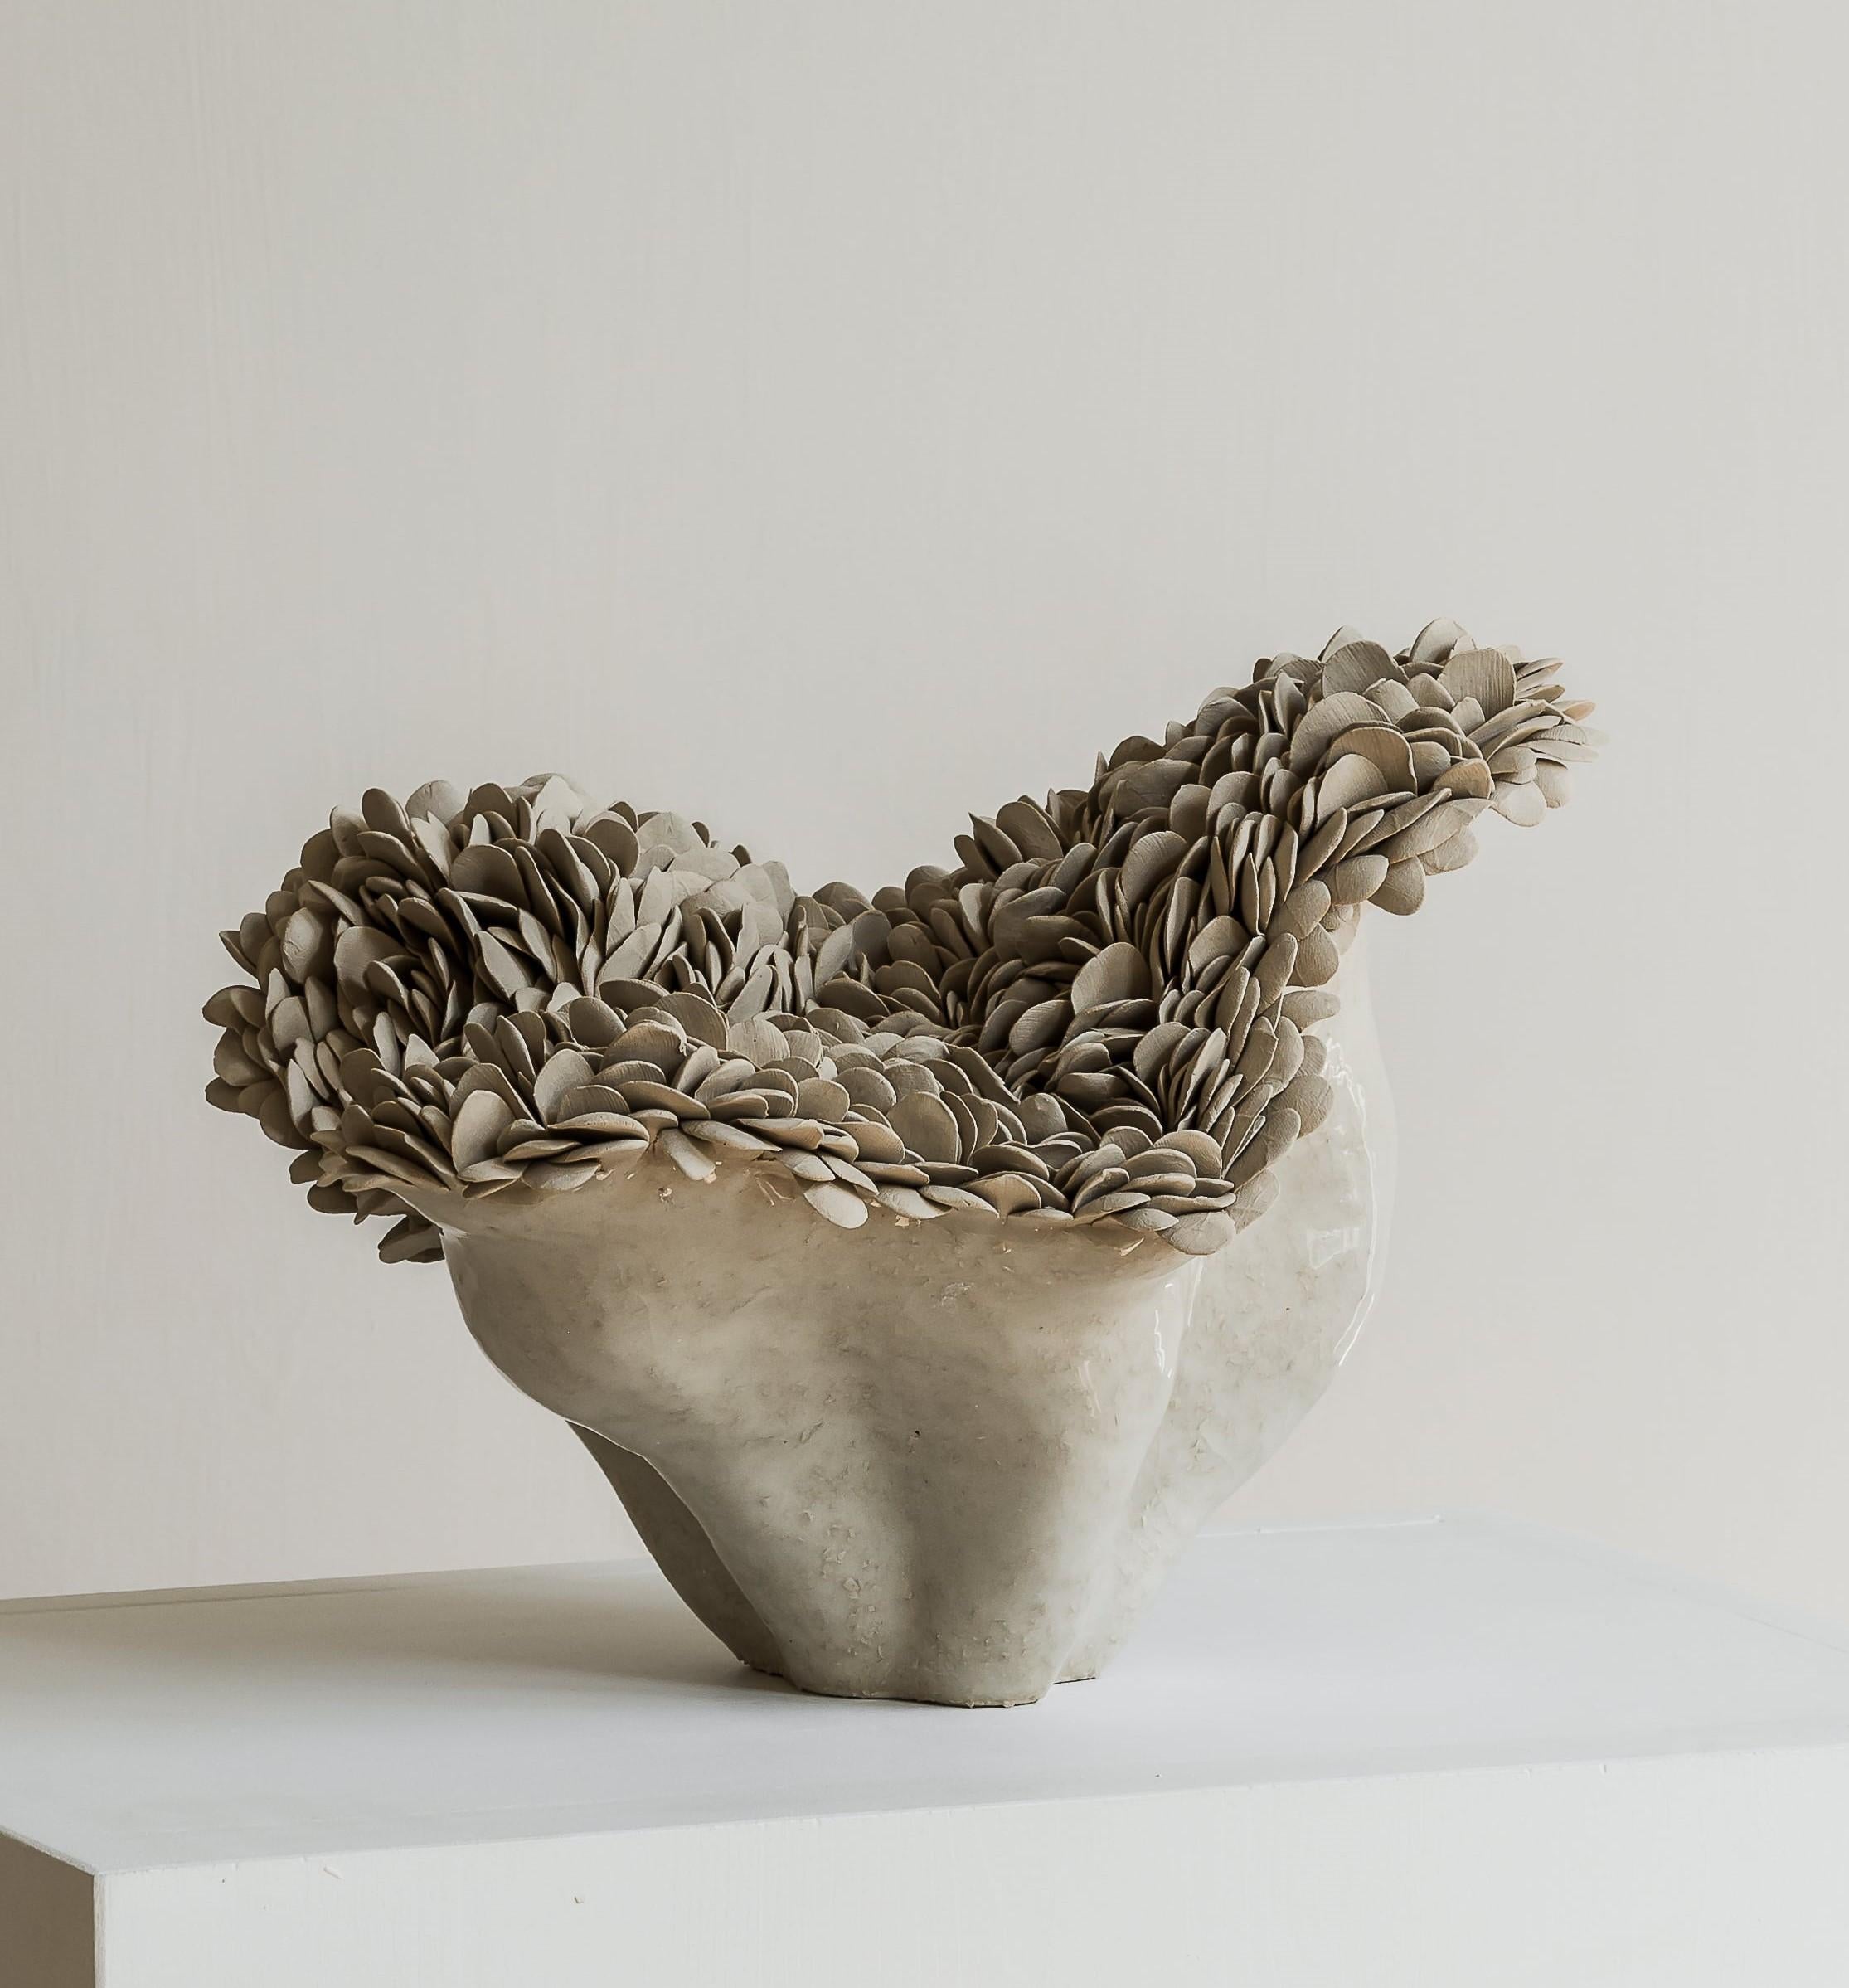 Nubes small sculpture by Hanna Heino
Dimensions: D 23 x W 28 x H 22 cm
Materials: Handbuilt, stoneware clay
Also available in different dimensions. 


Hanna Heino is a contemporary clay artist from Finland known for her delicate form language